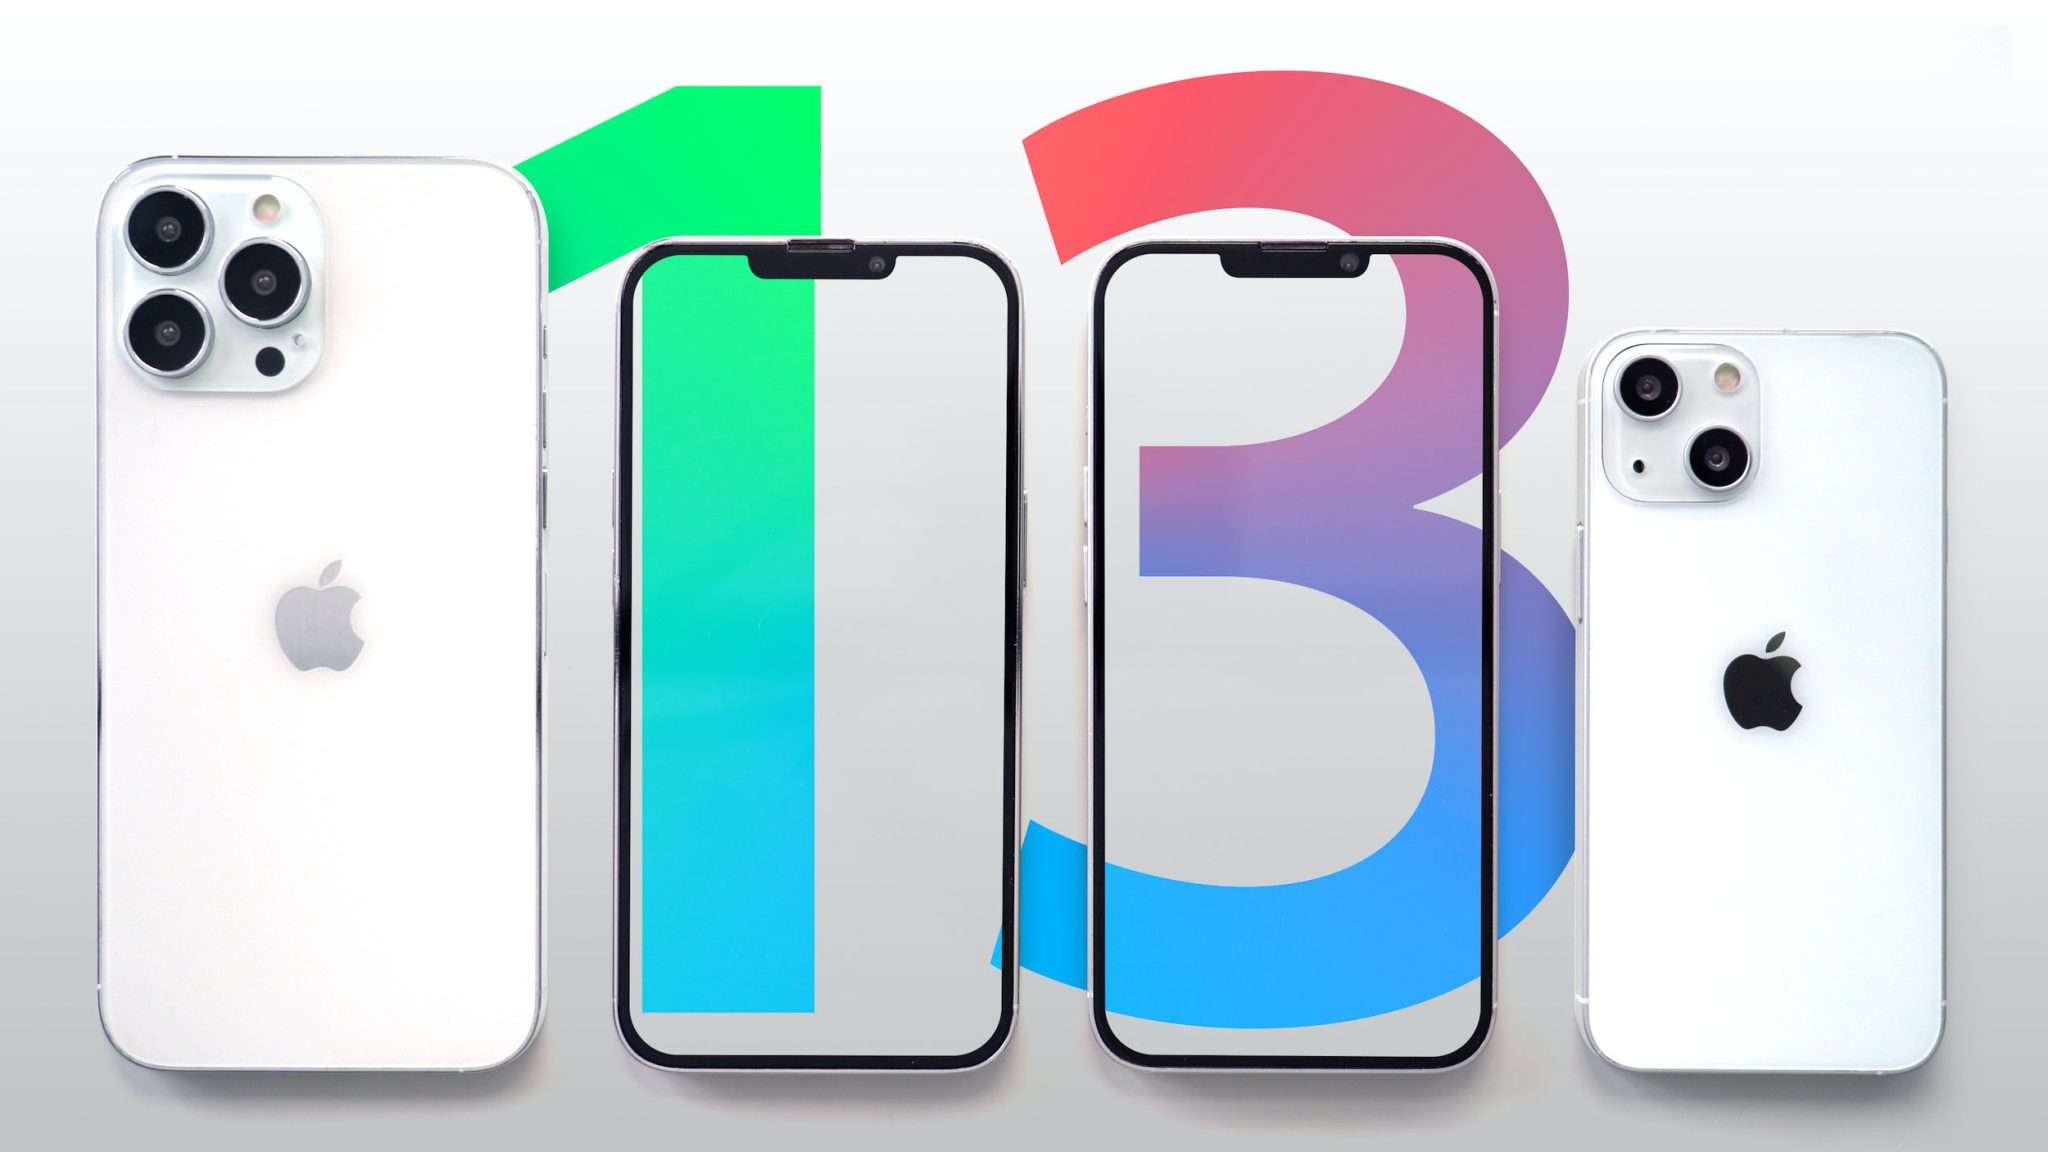 IPHONE 13: WHAT IT WILL BE LIKE?